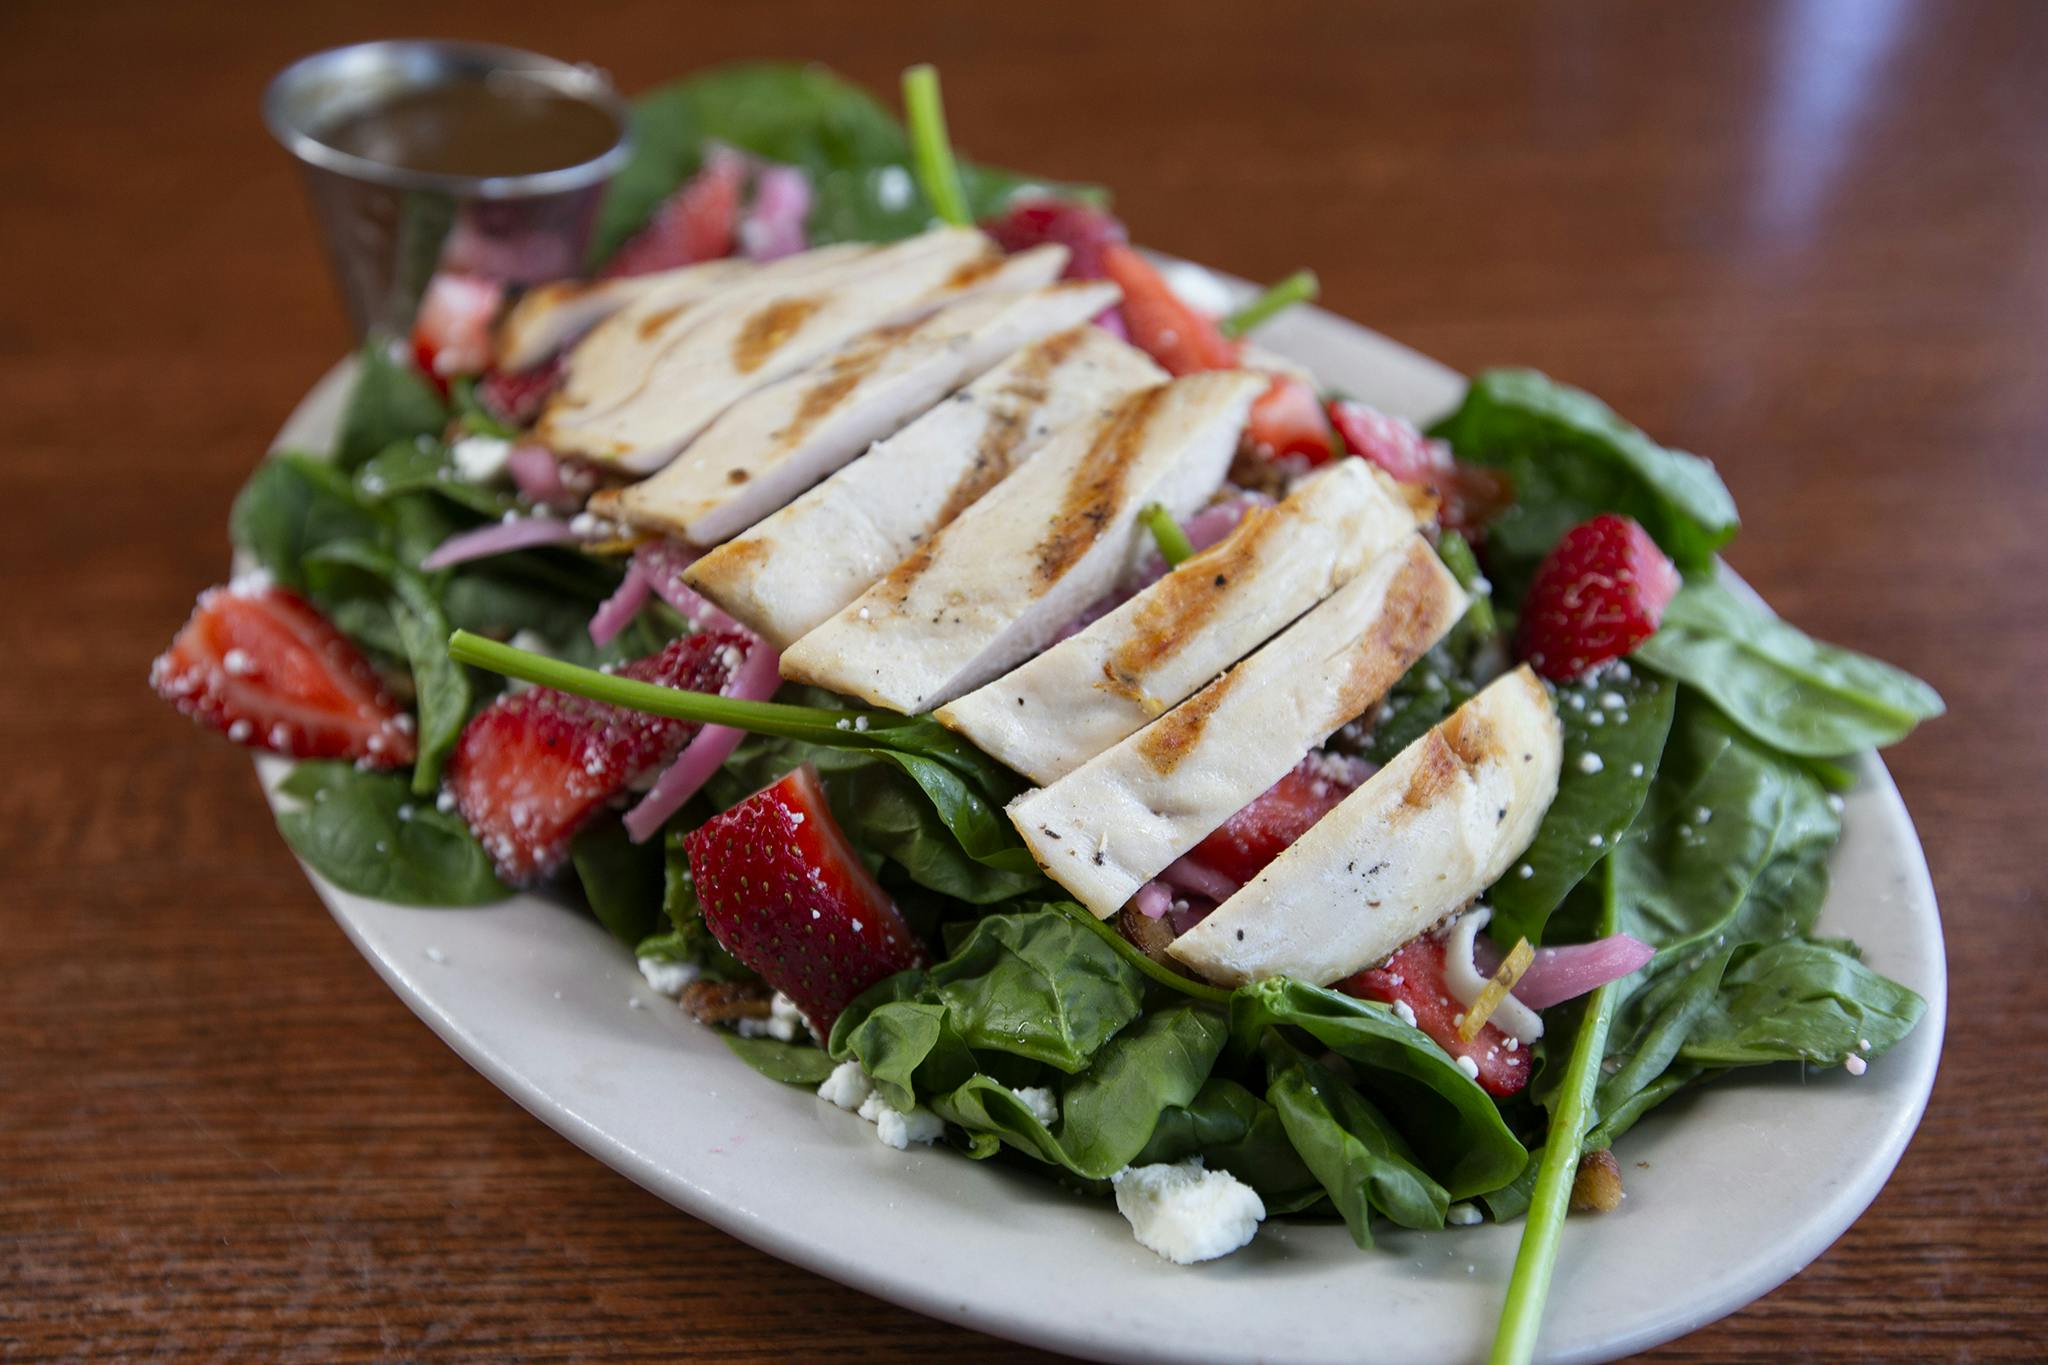 Spinach And Strawberry Salad from Candlelite Chicago in Chicago, IL